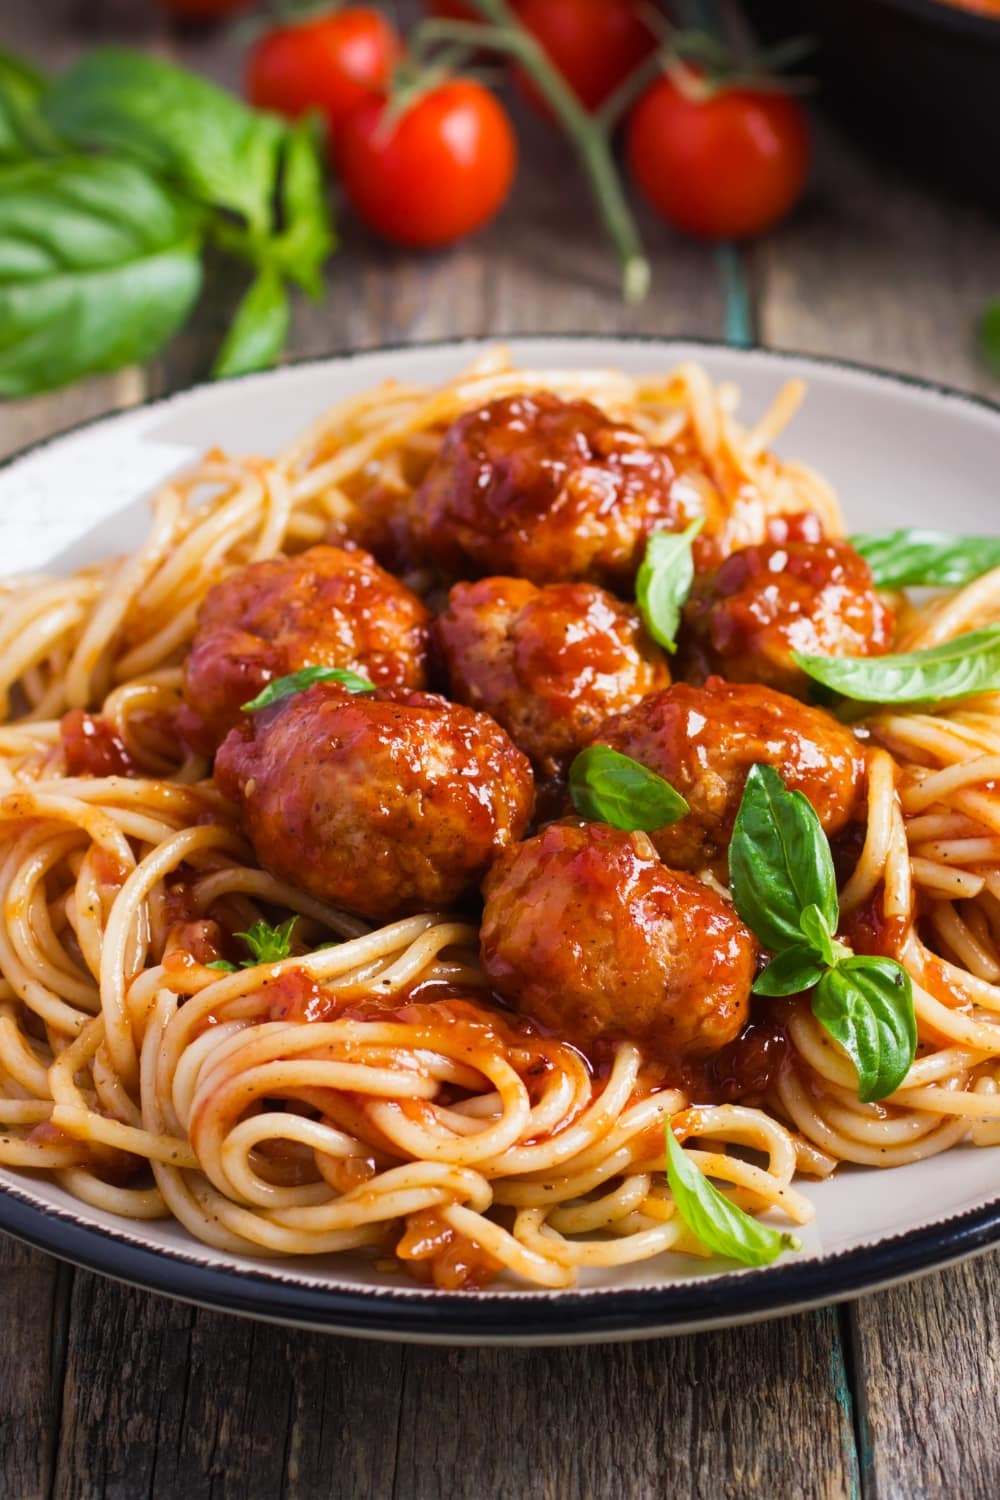 Saucy Spaghetti Topped With Meatballs Garnished With Fresh Basil Leaves